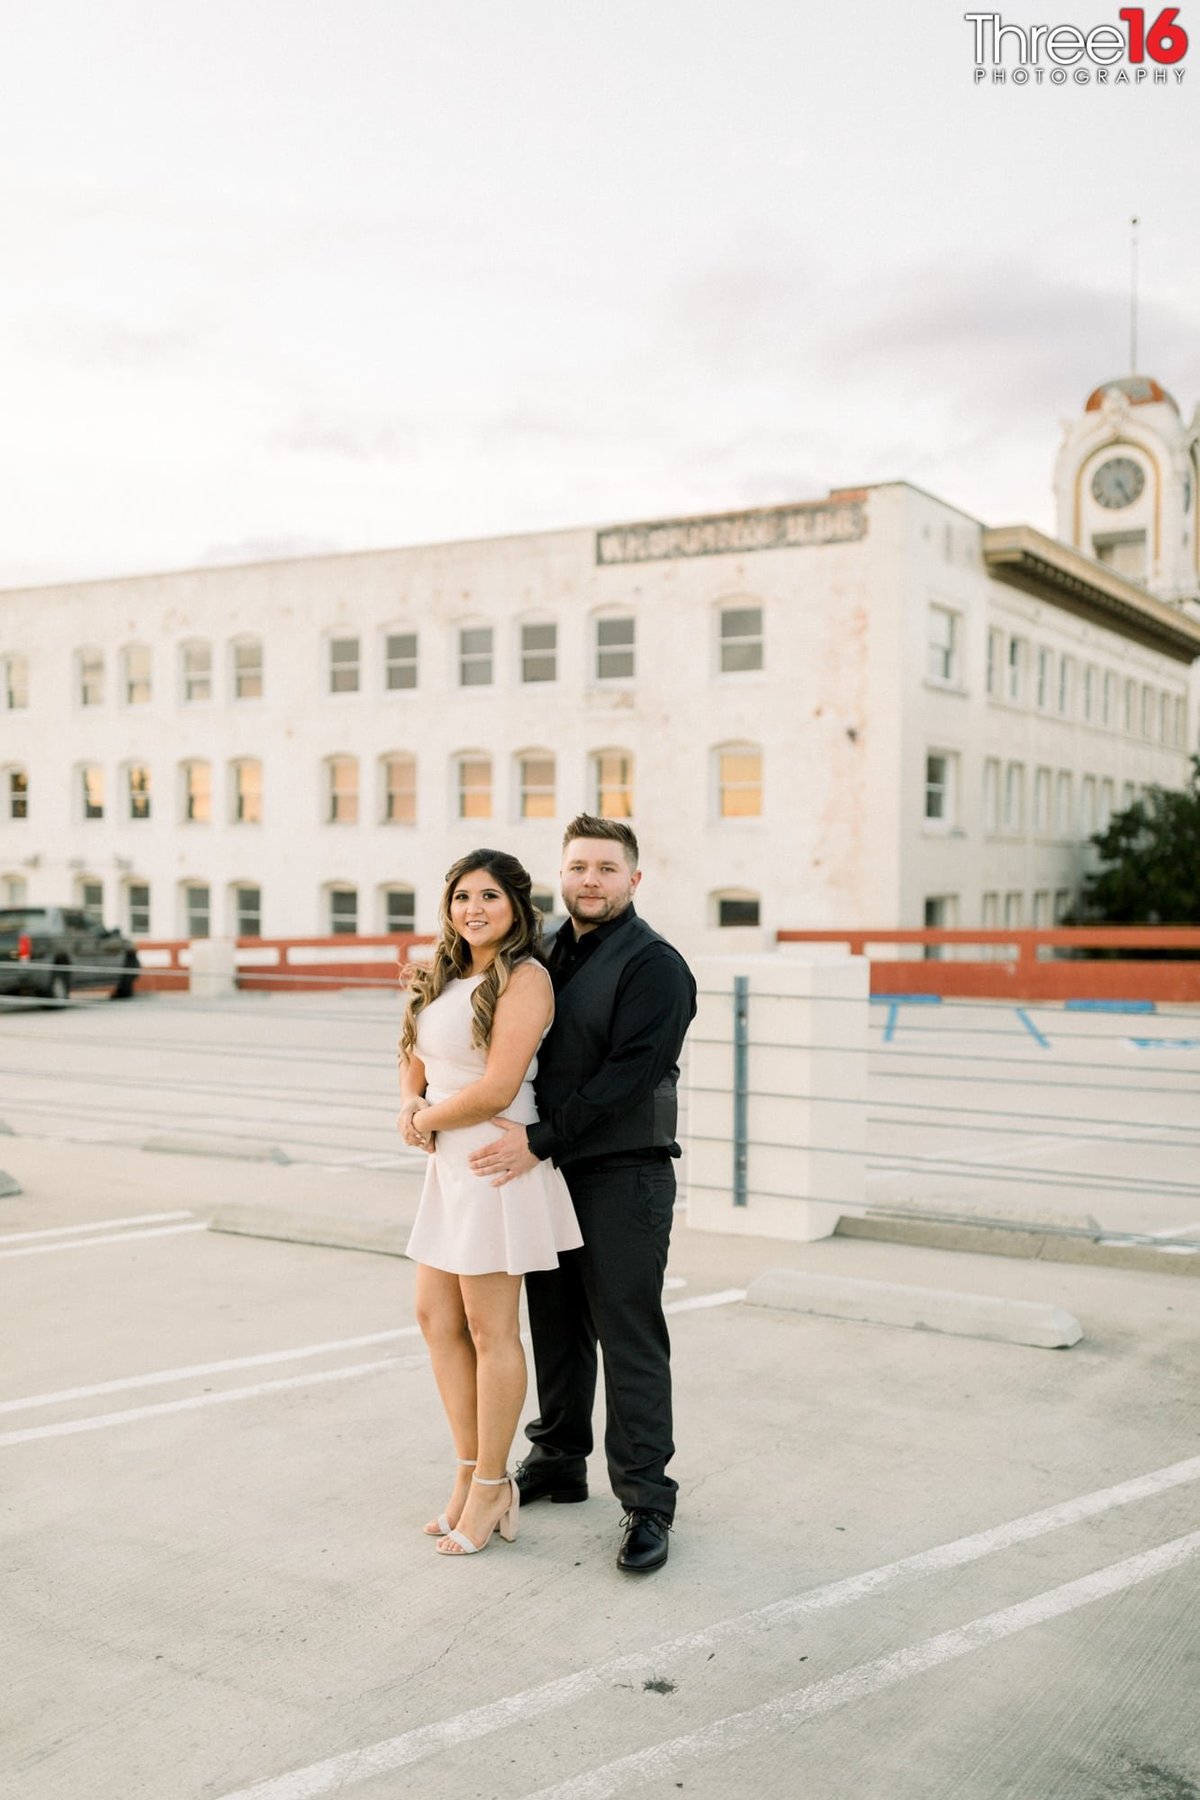 Engaged couple pose together as they stand atop of building parking lot